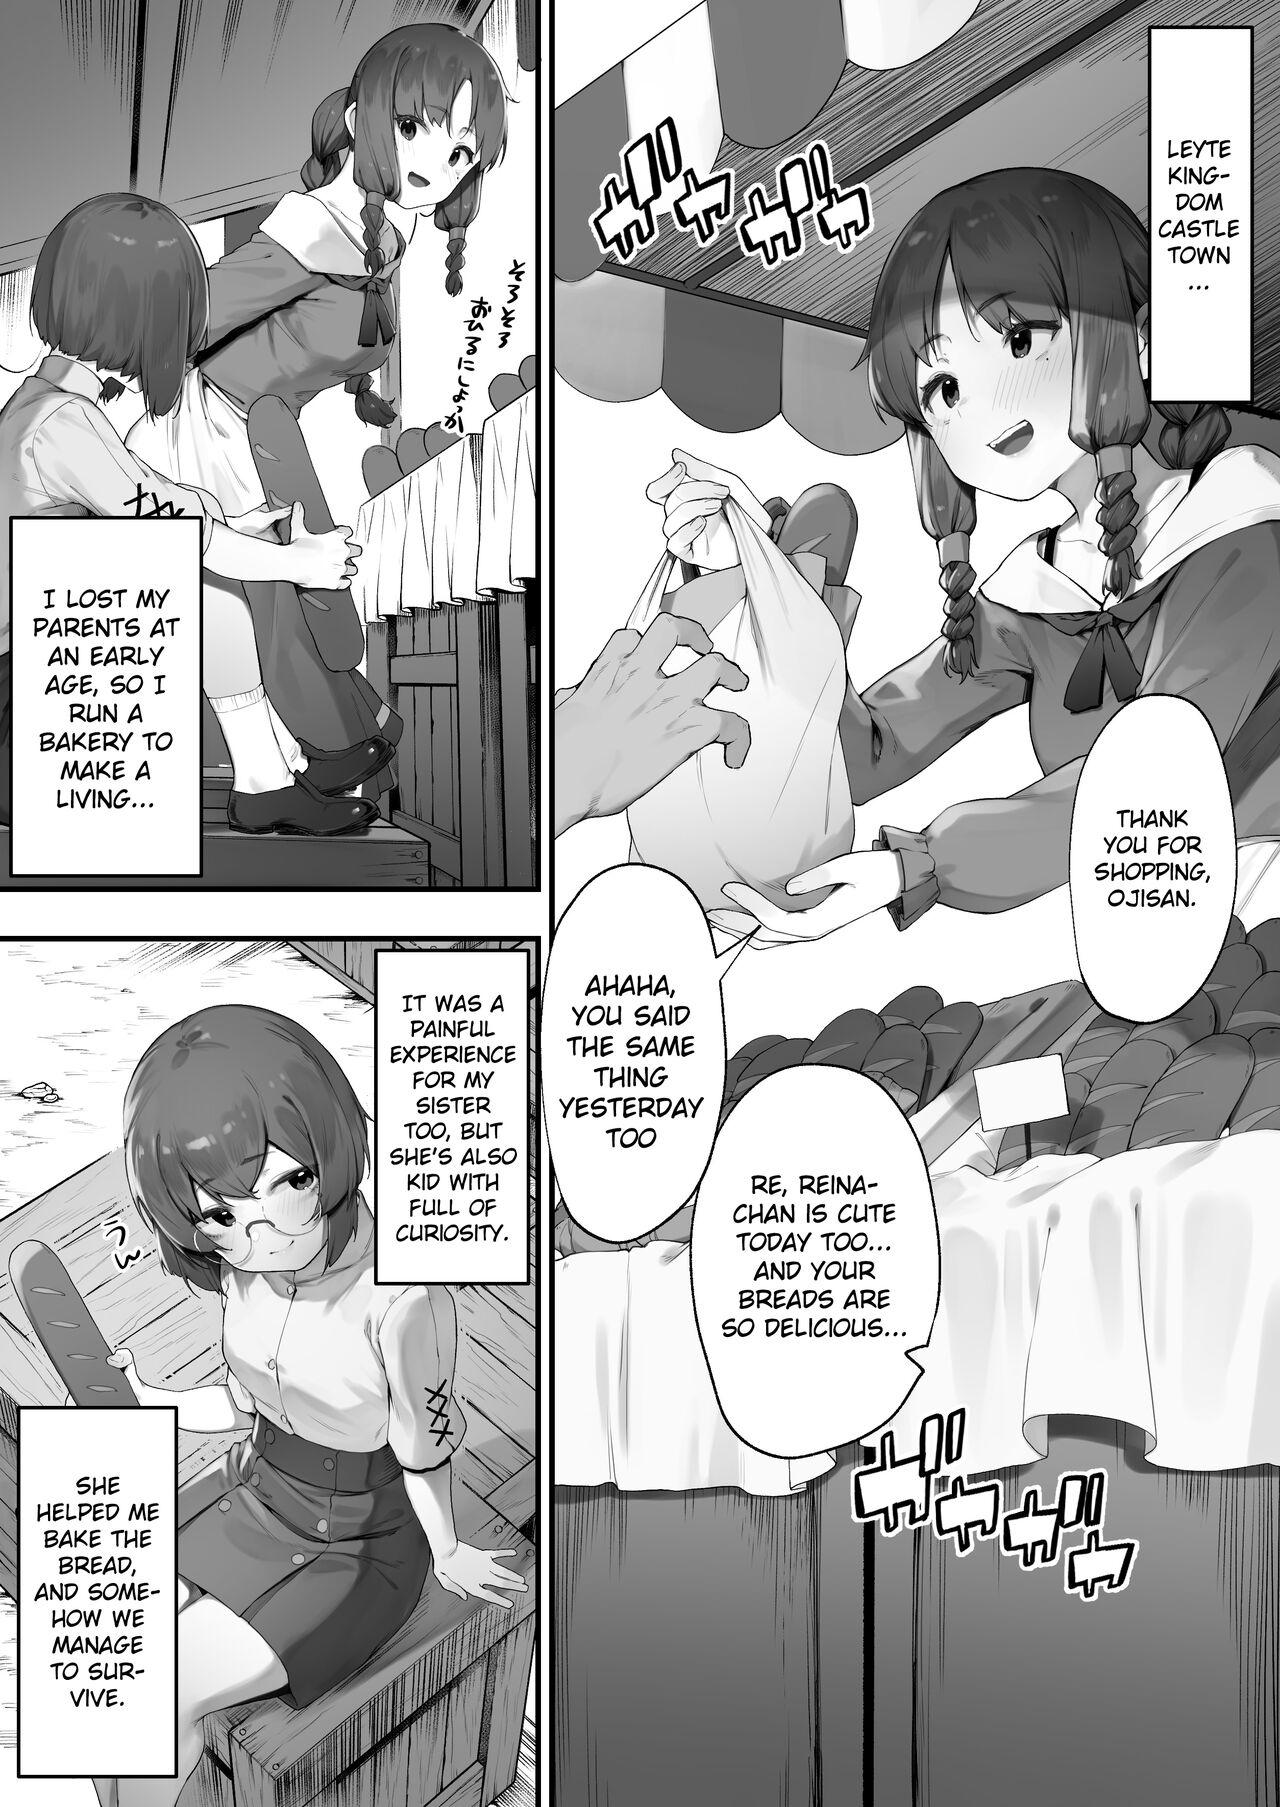 Cougar Oujo no Meirei de Stalker to Kekkon Saserareru Hanashi 1 | A story about being married to a stalker by the order of a princess 1 - Original Flaquita - Page 2